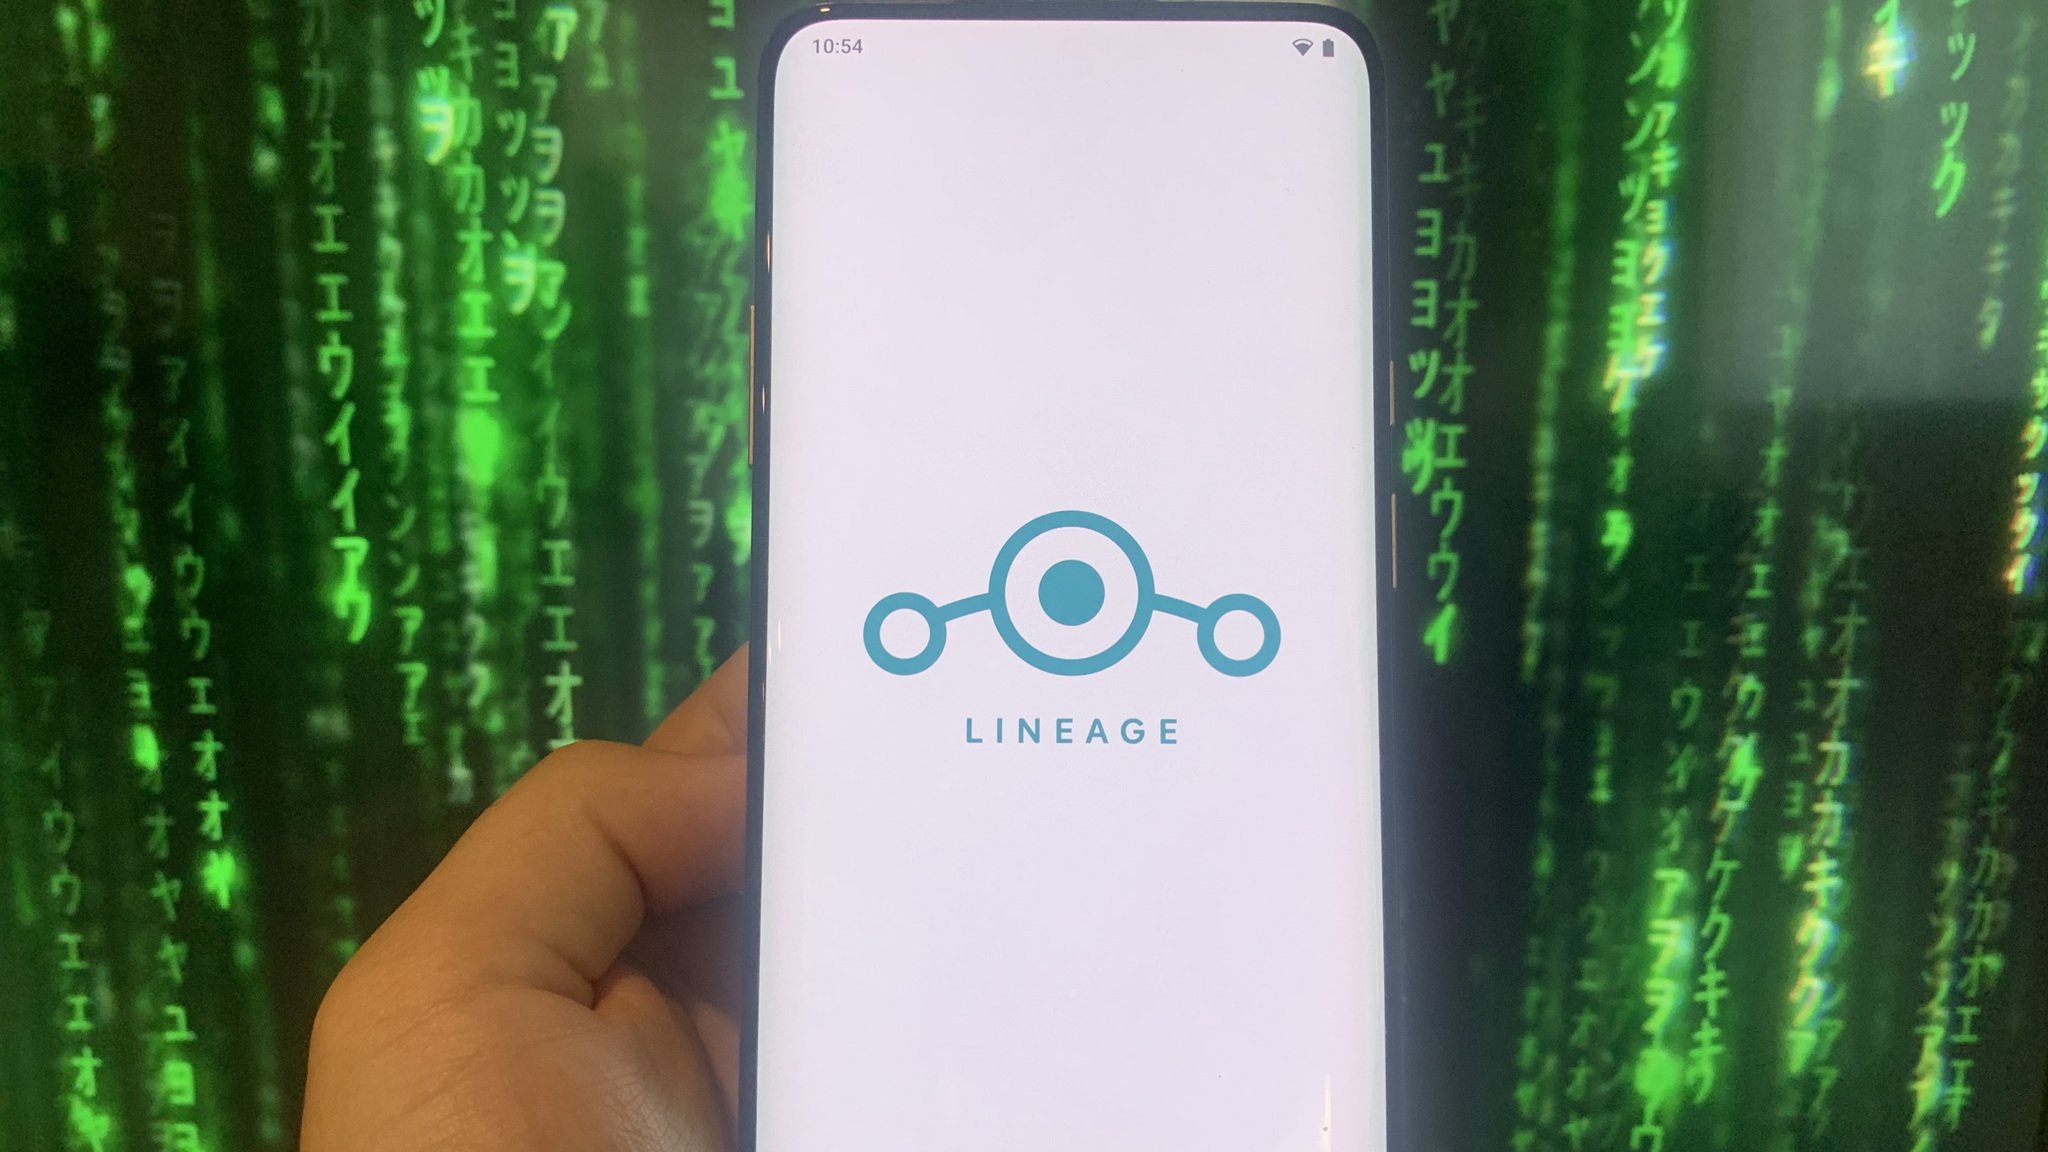 LineageOS on the OnePlus 7 Pro